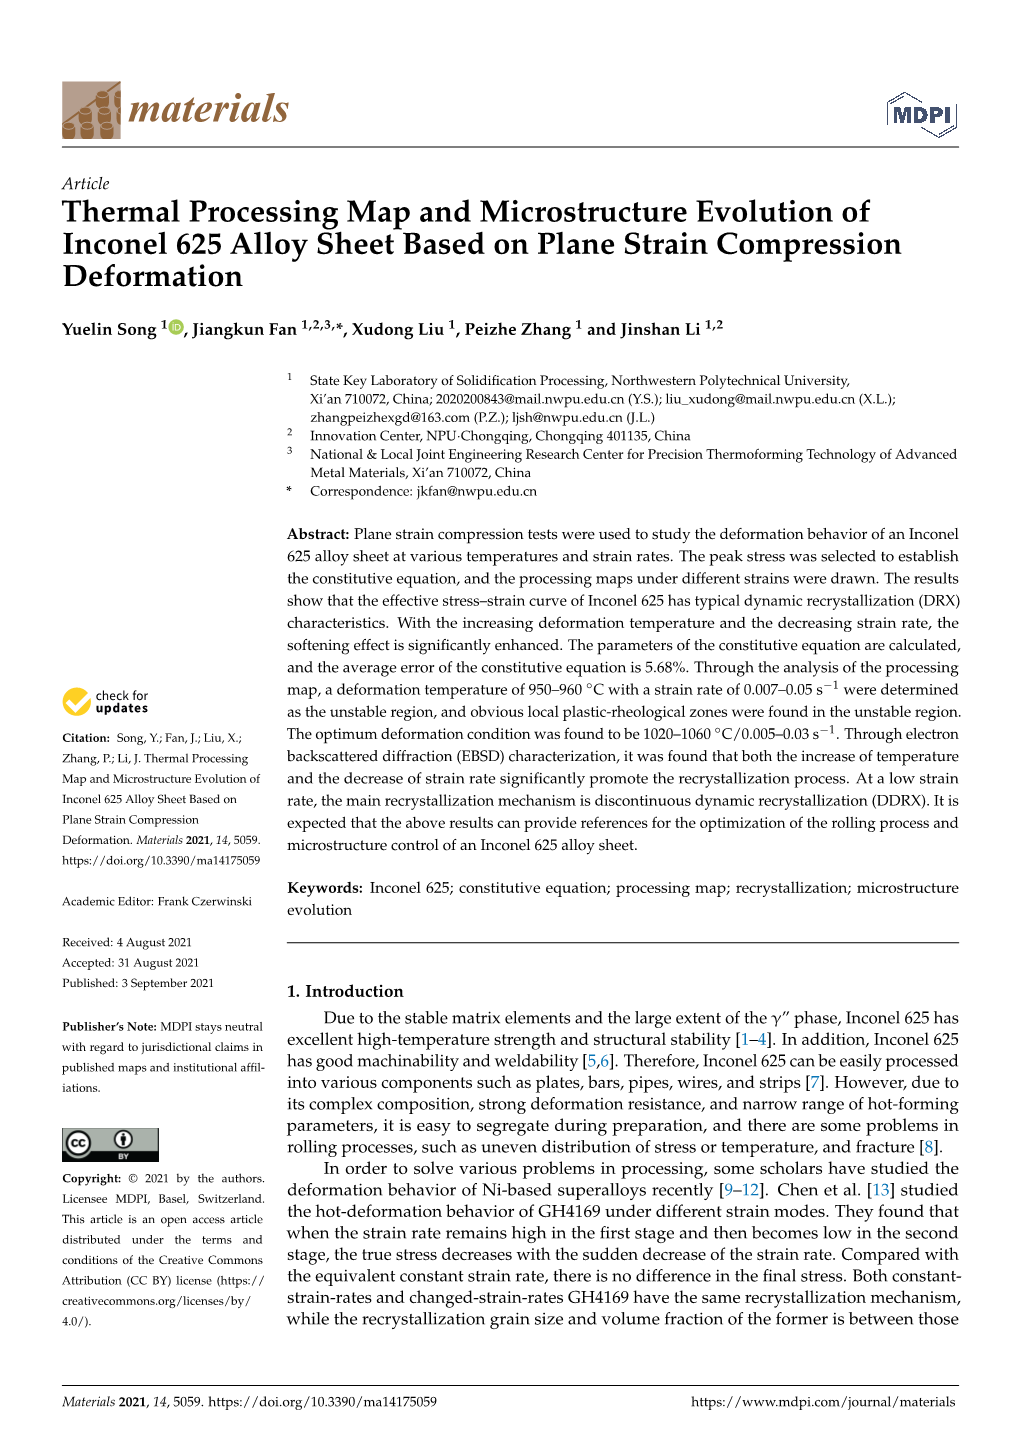 Thermal Processing Map and Microstructure Evolution of Inconel 625 Alloy Sheet Based on Plane Strain Compression Deformation